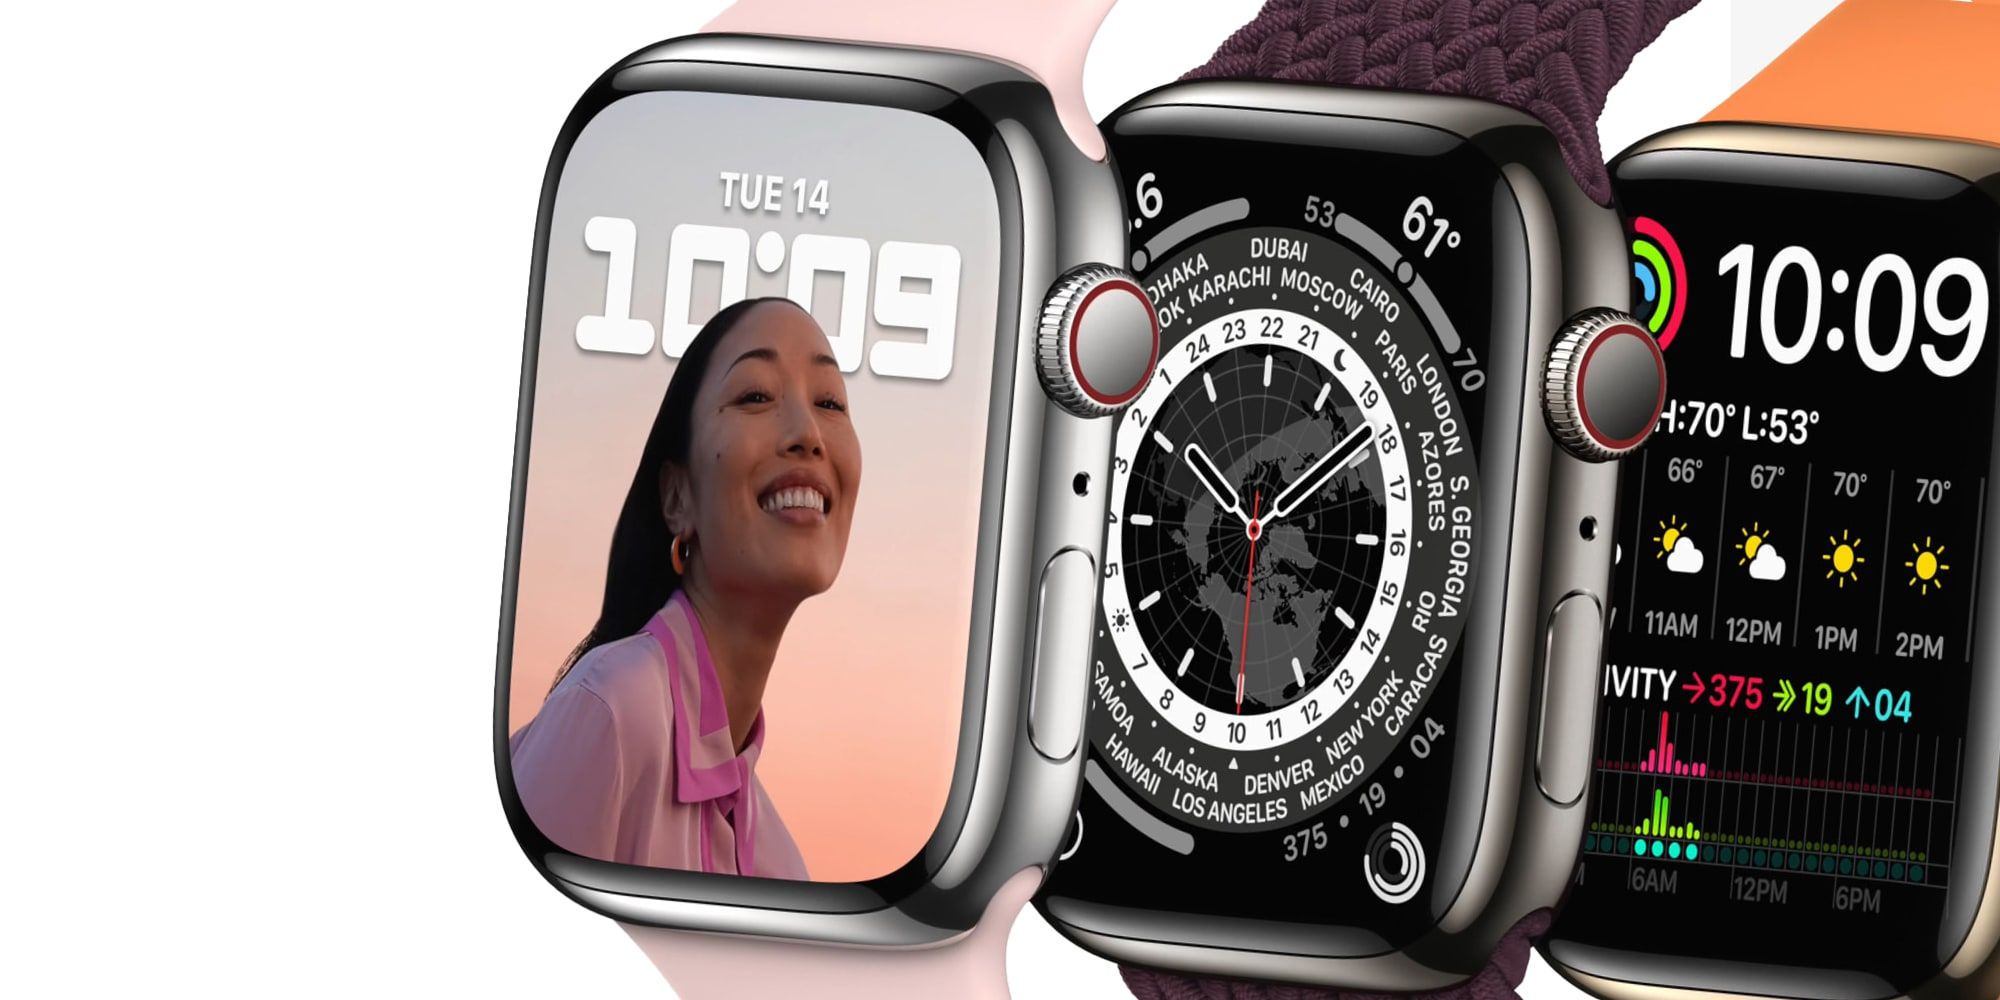 How To Make An Apple Watch Speak Or Vibrate The Time